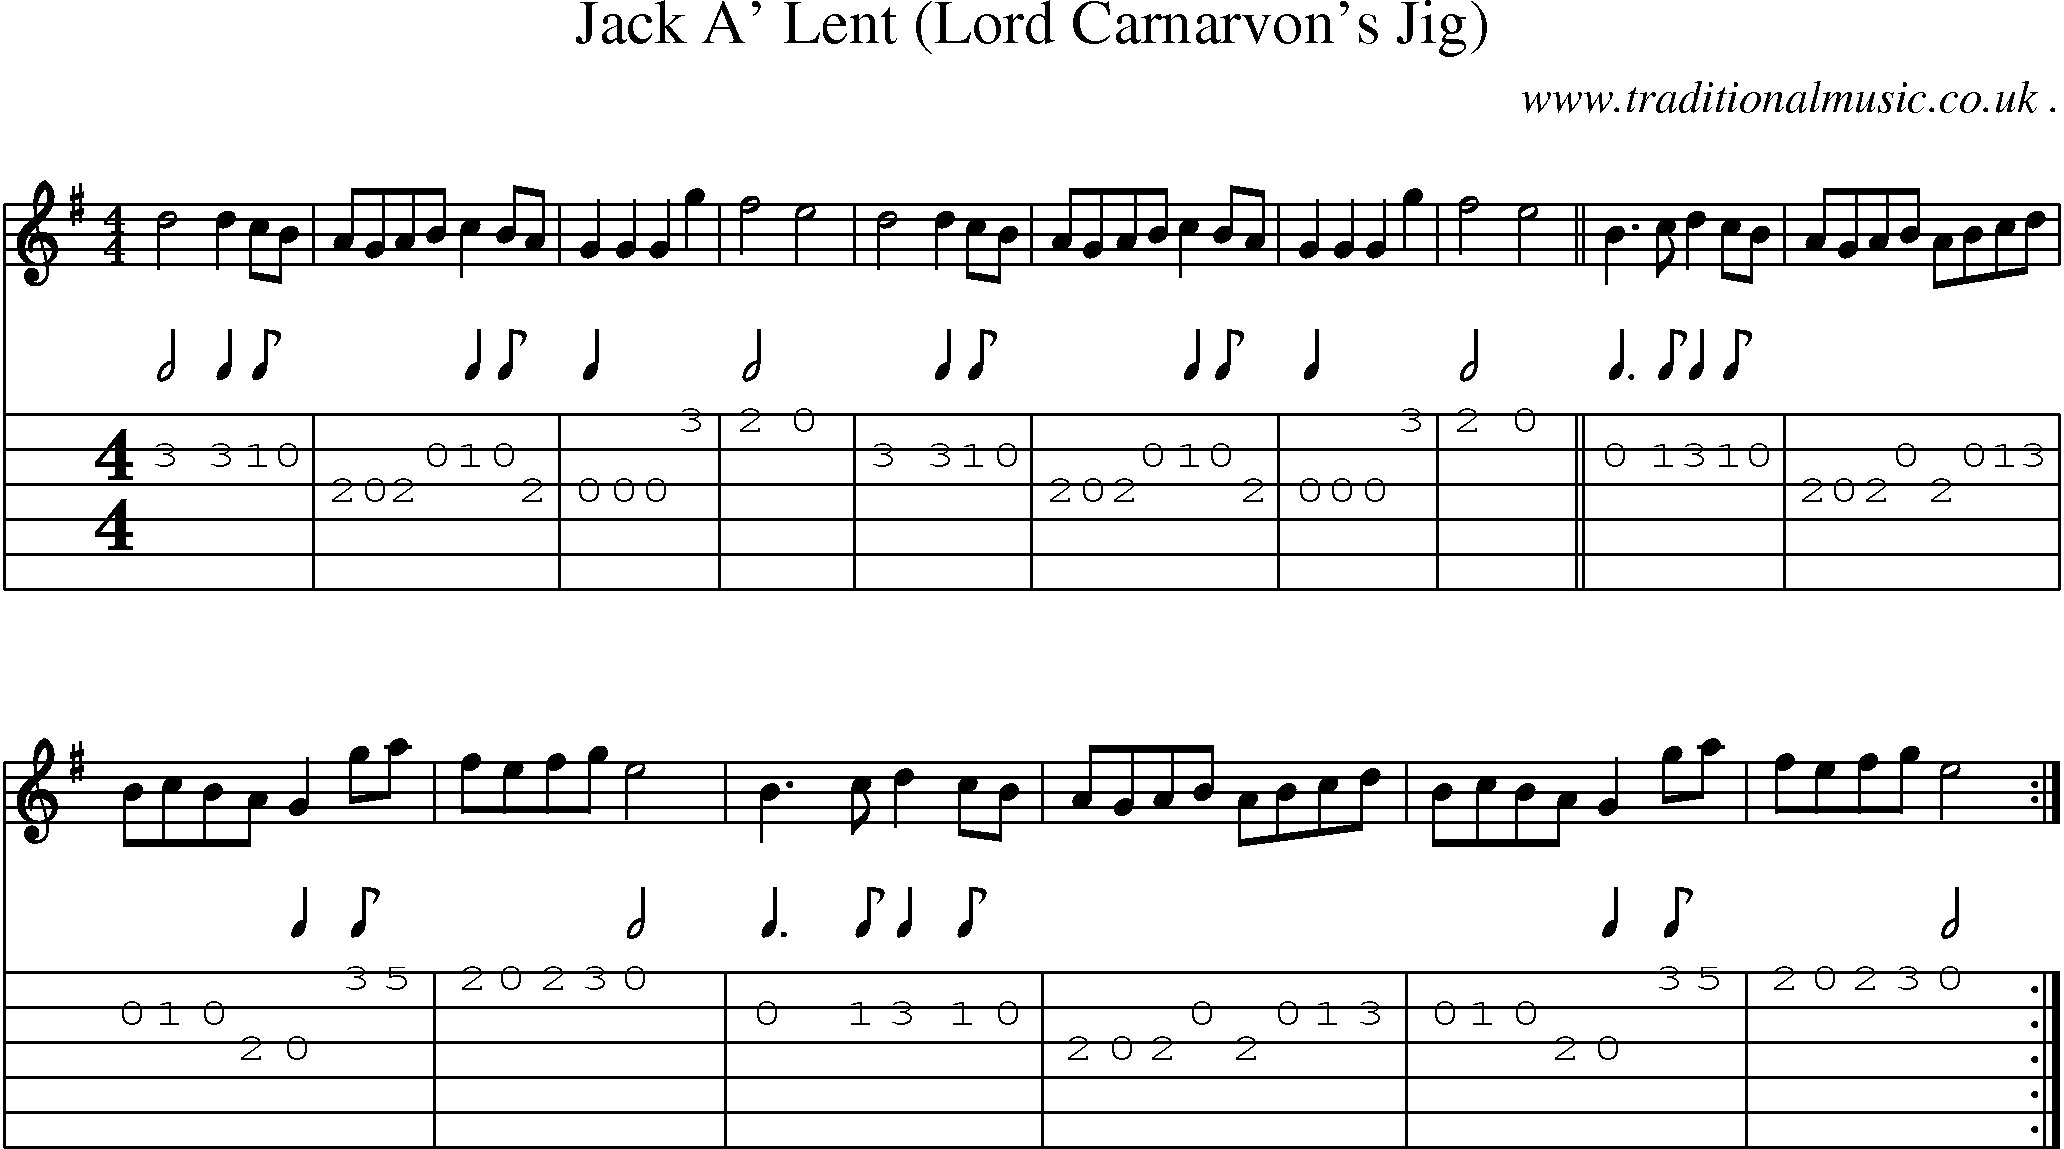 Sheet-Music and Guitar Tabs for Jack A Lent (lord Carnarvons Jig)